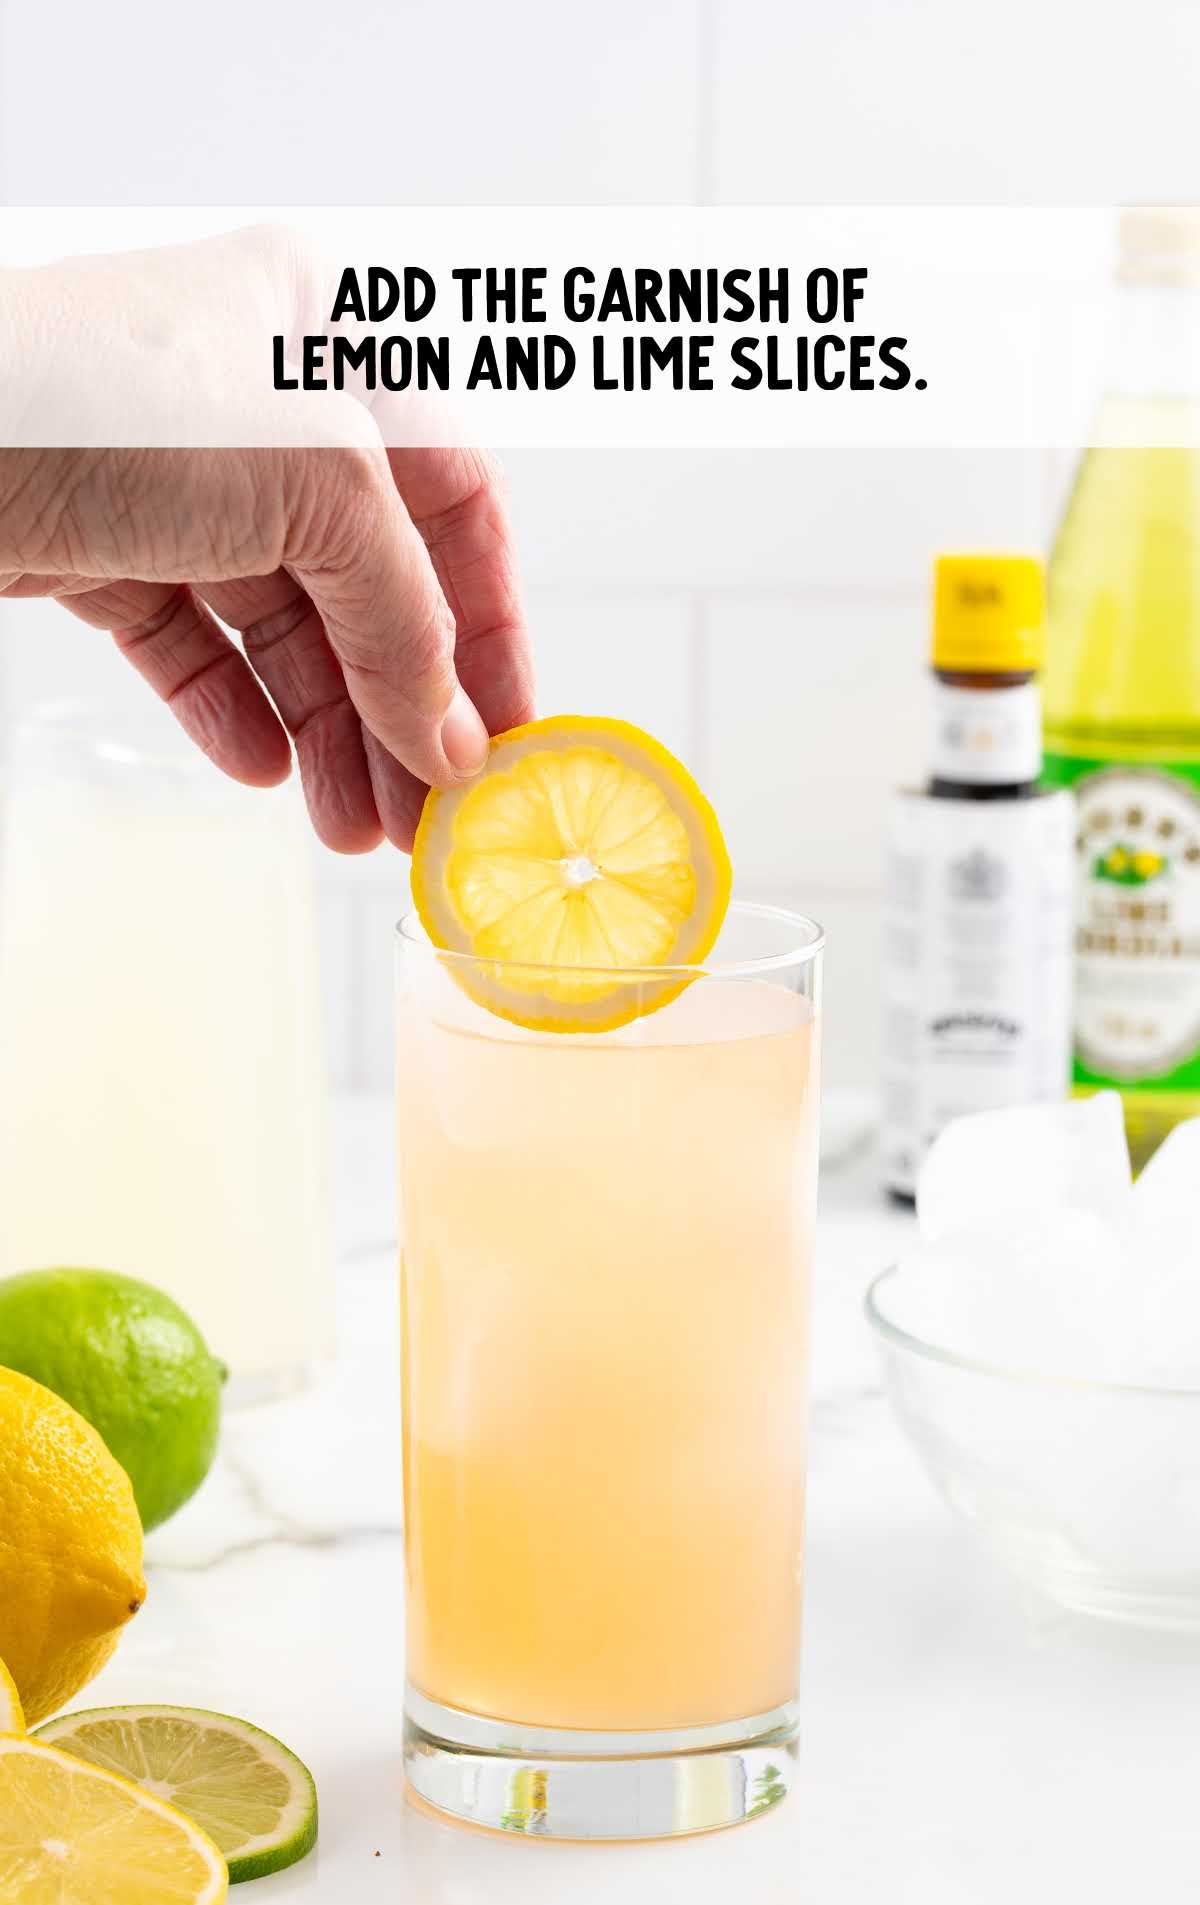 slices of lemon added to a glass of Lemon Lime Bitters